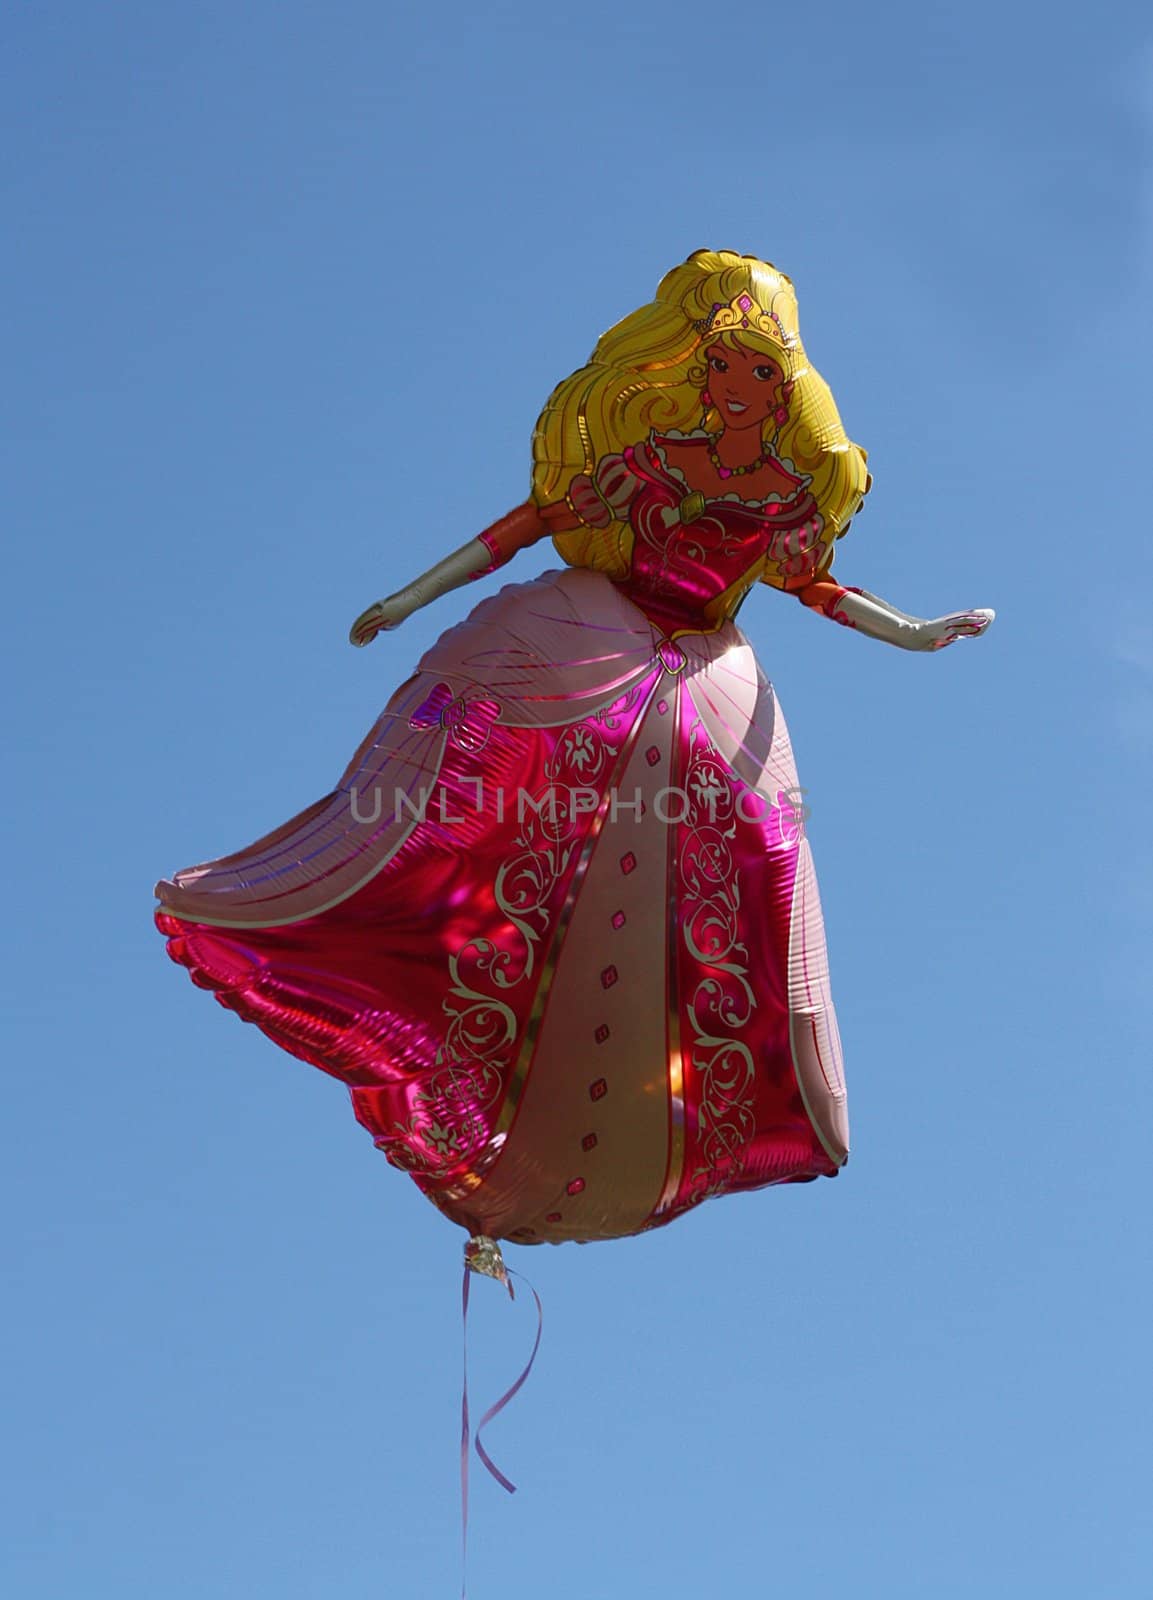 Helium balloon shaped as a princess hovering against a blue sky